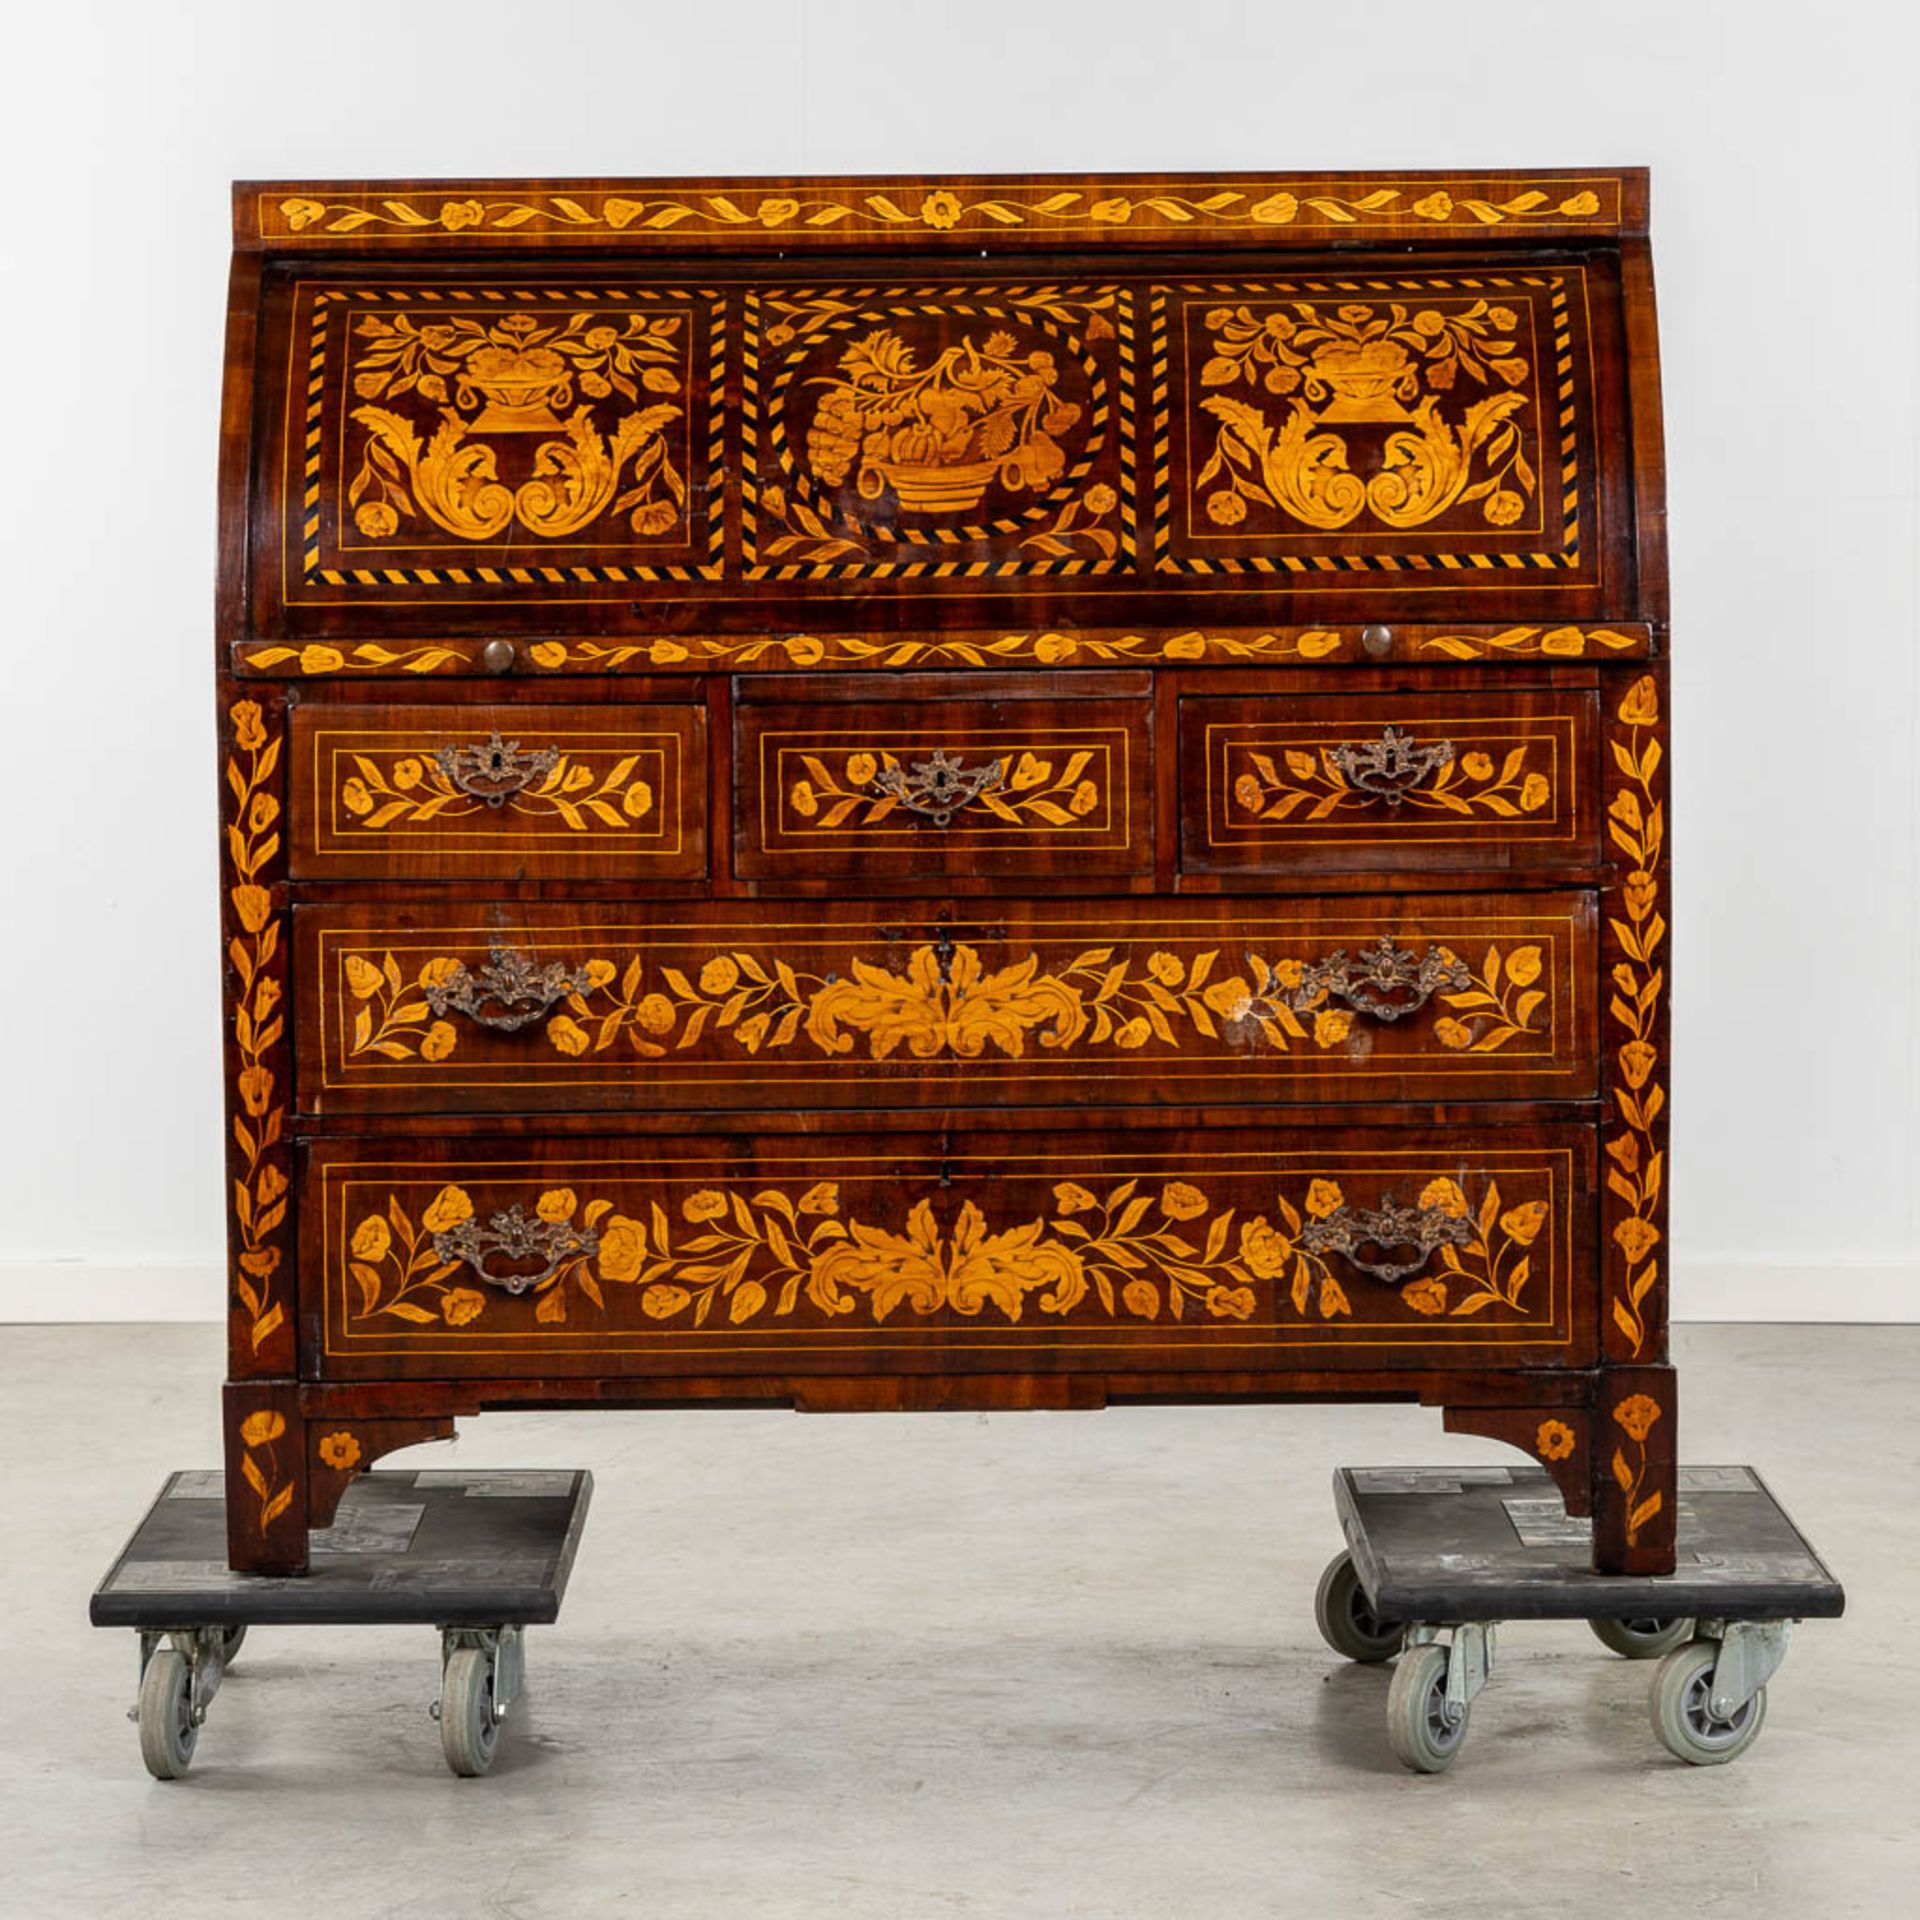 A fine marquetry inlay secretaire cabinet, The Netherlands, 18th C. (L:51 x W:112 x H:108 cm) - Image 6 of 20